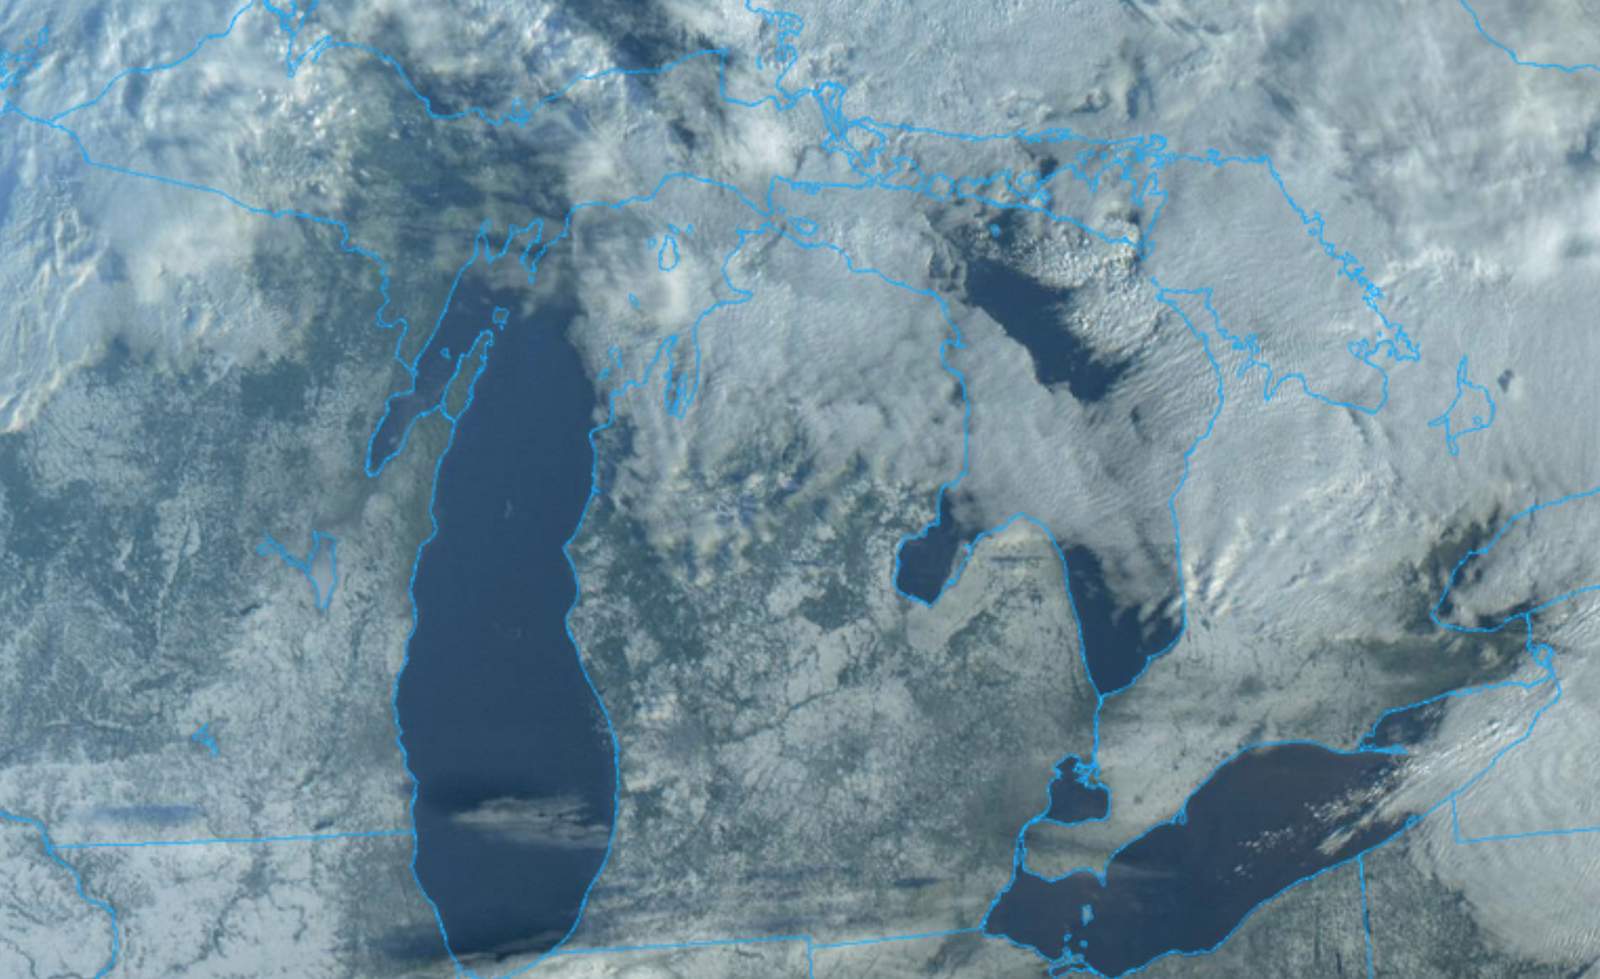 Take a moment to admire this satellite view of wintry Michigan